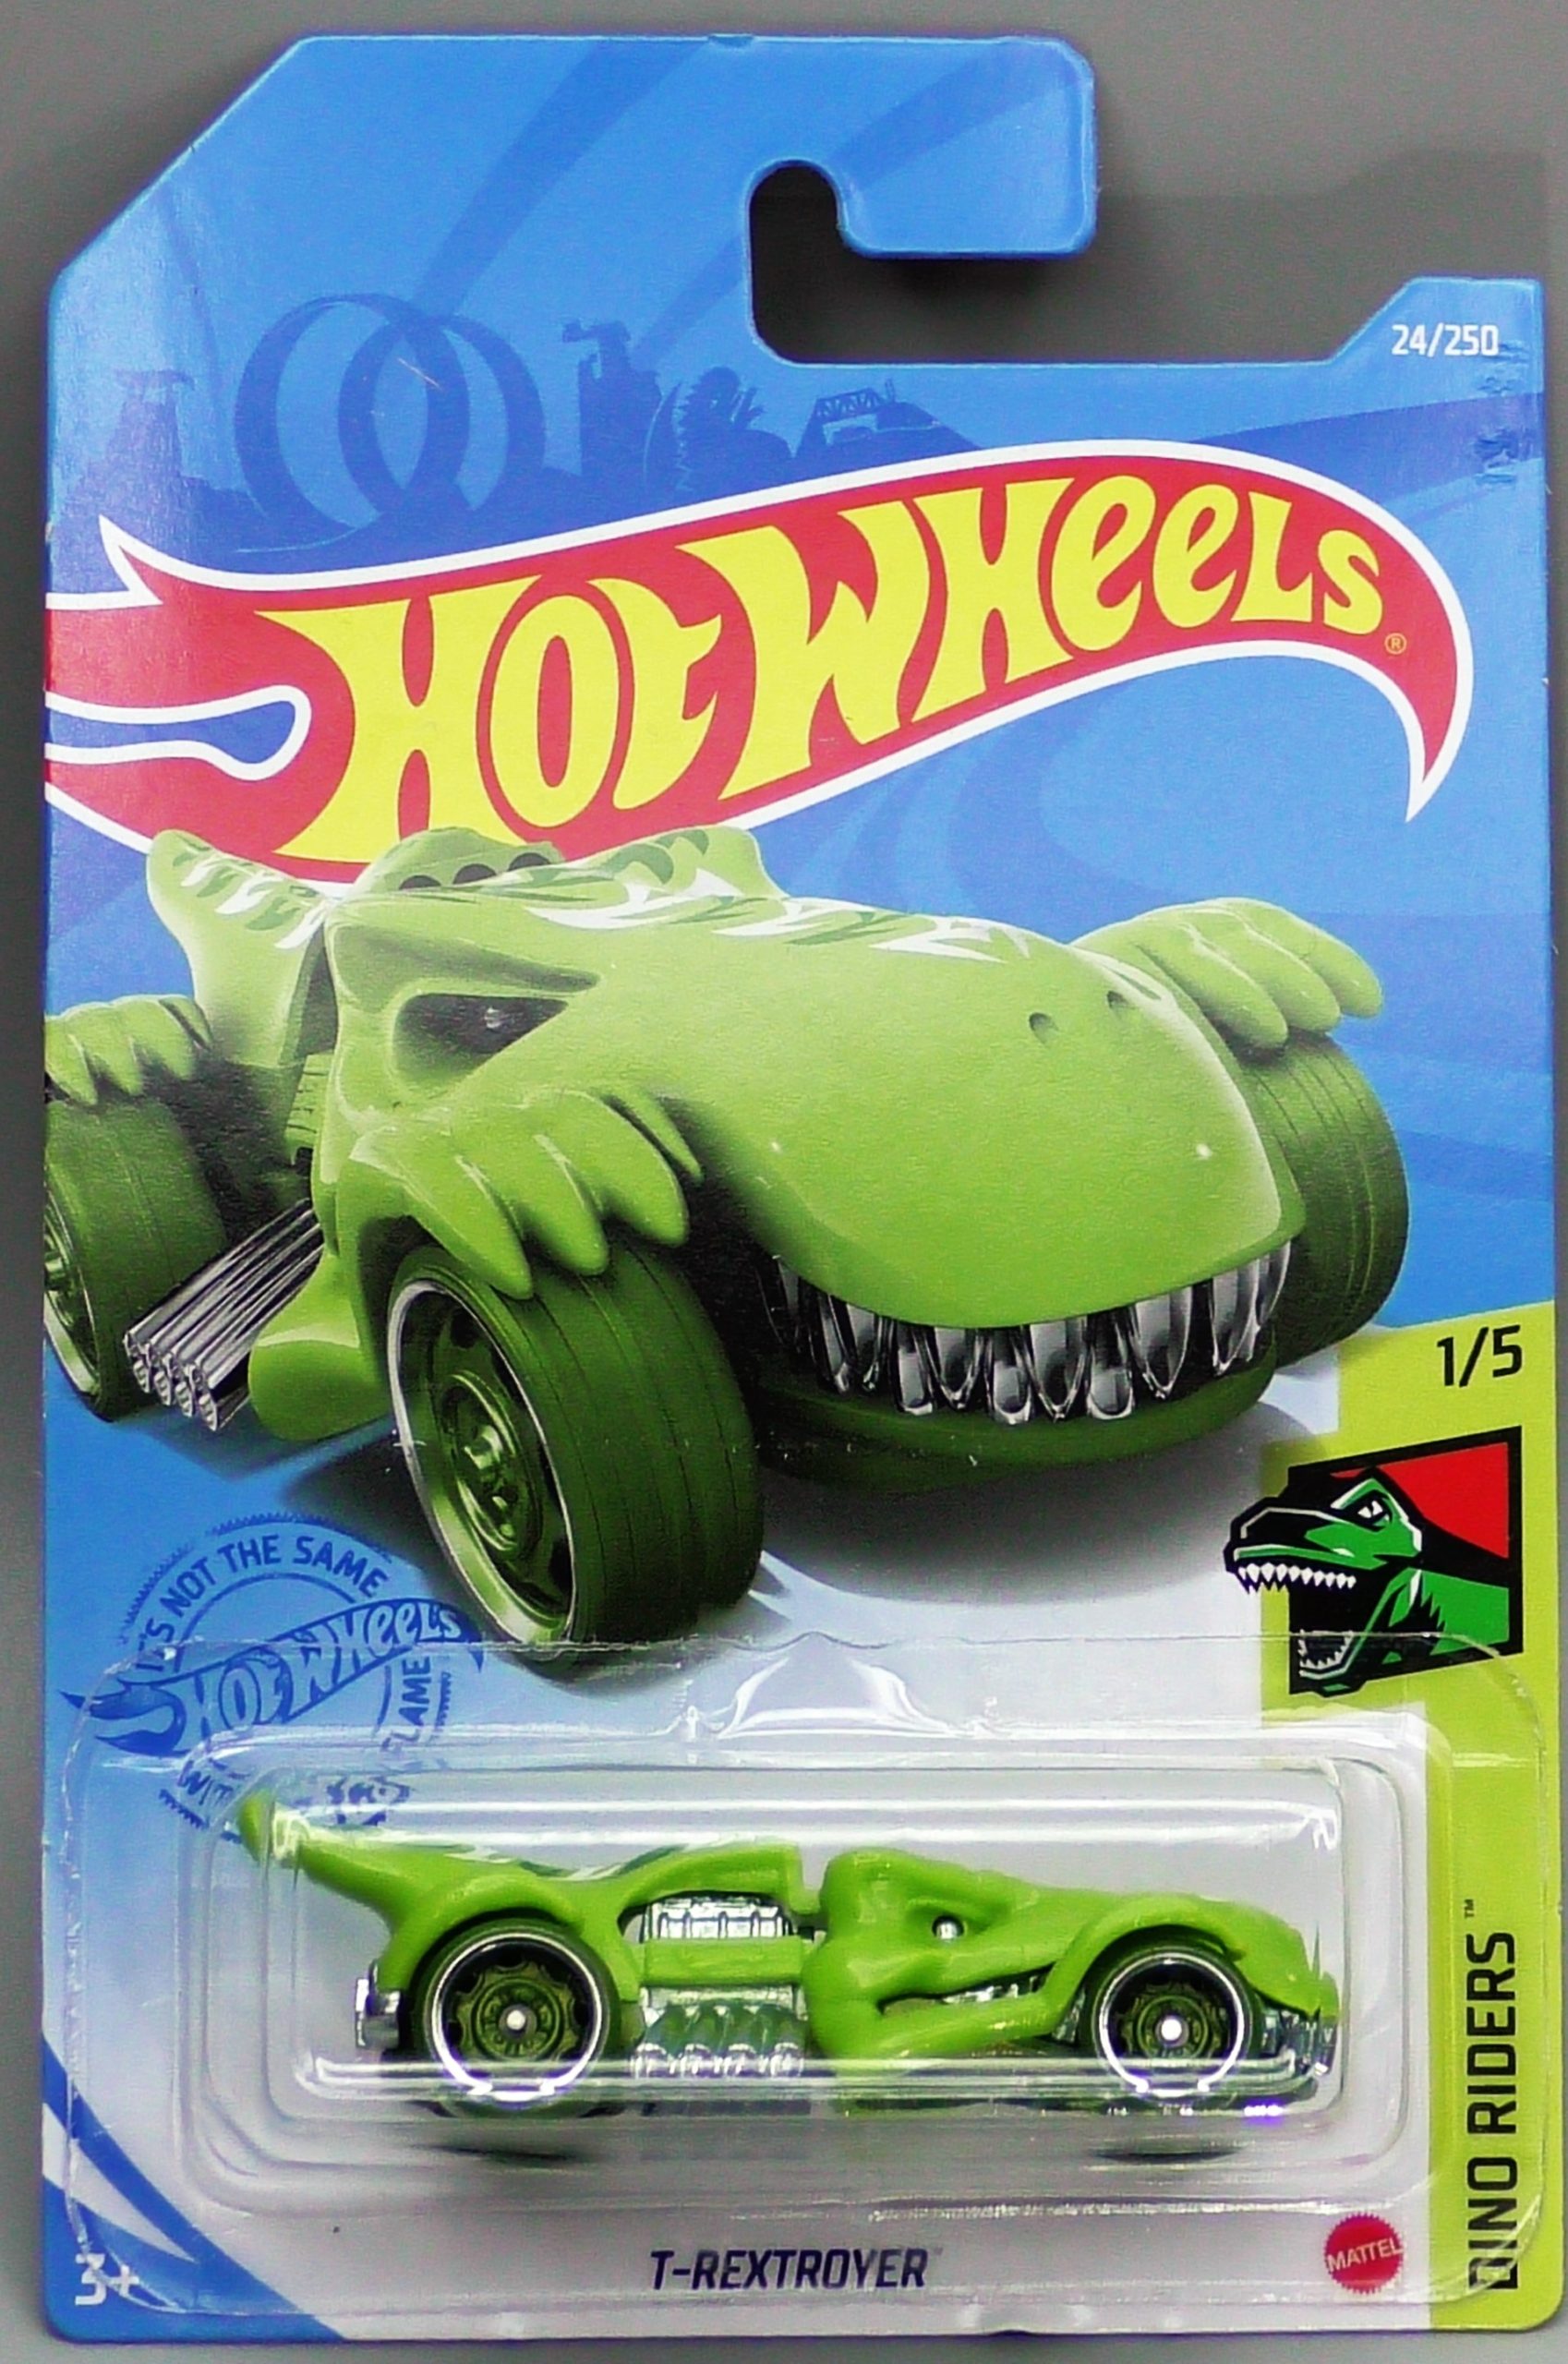 Hot Wheels T-Rextroyer, [Gold] 24/250 Dino Riders 1/5